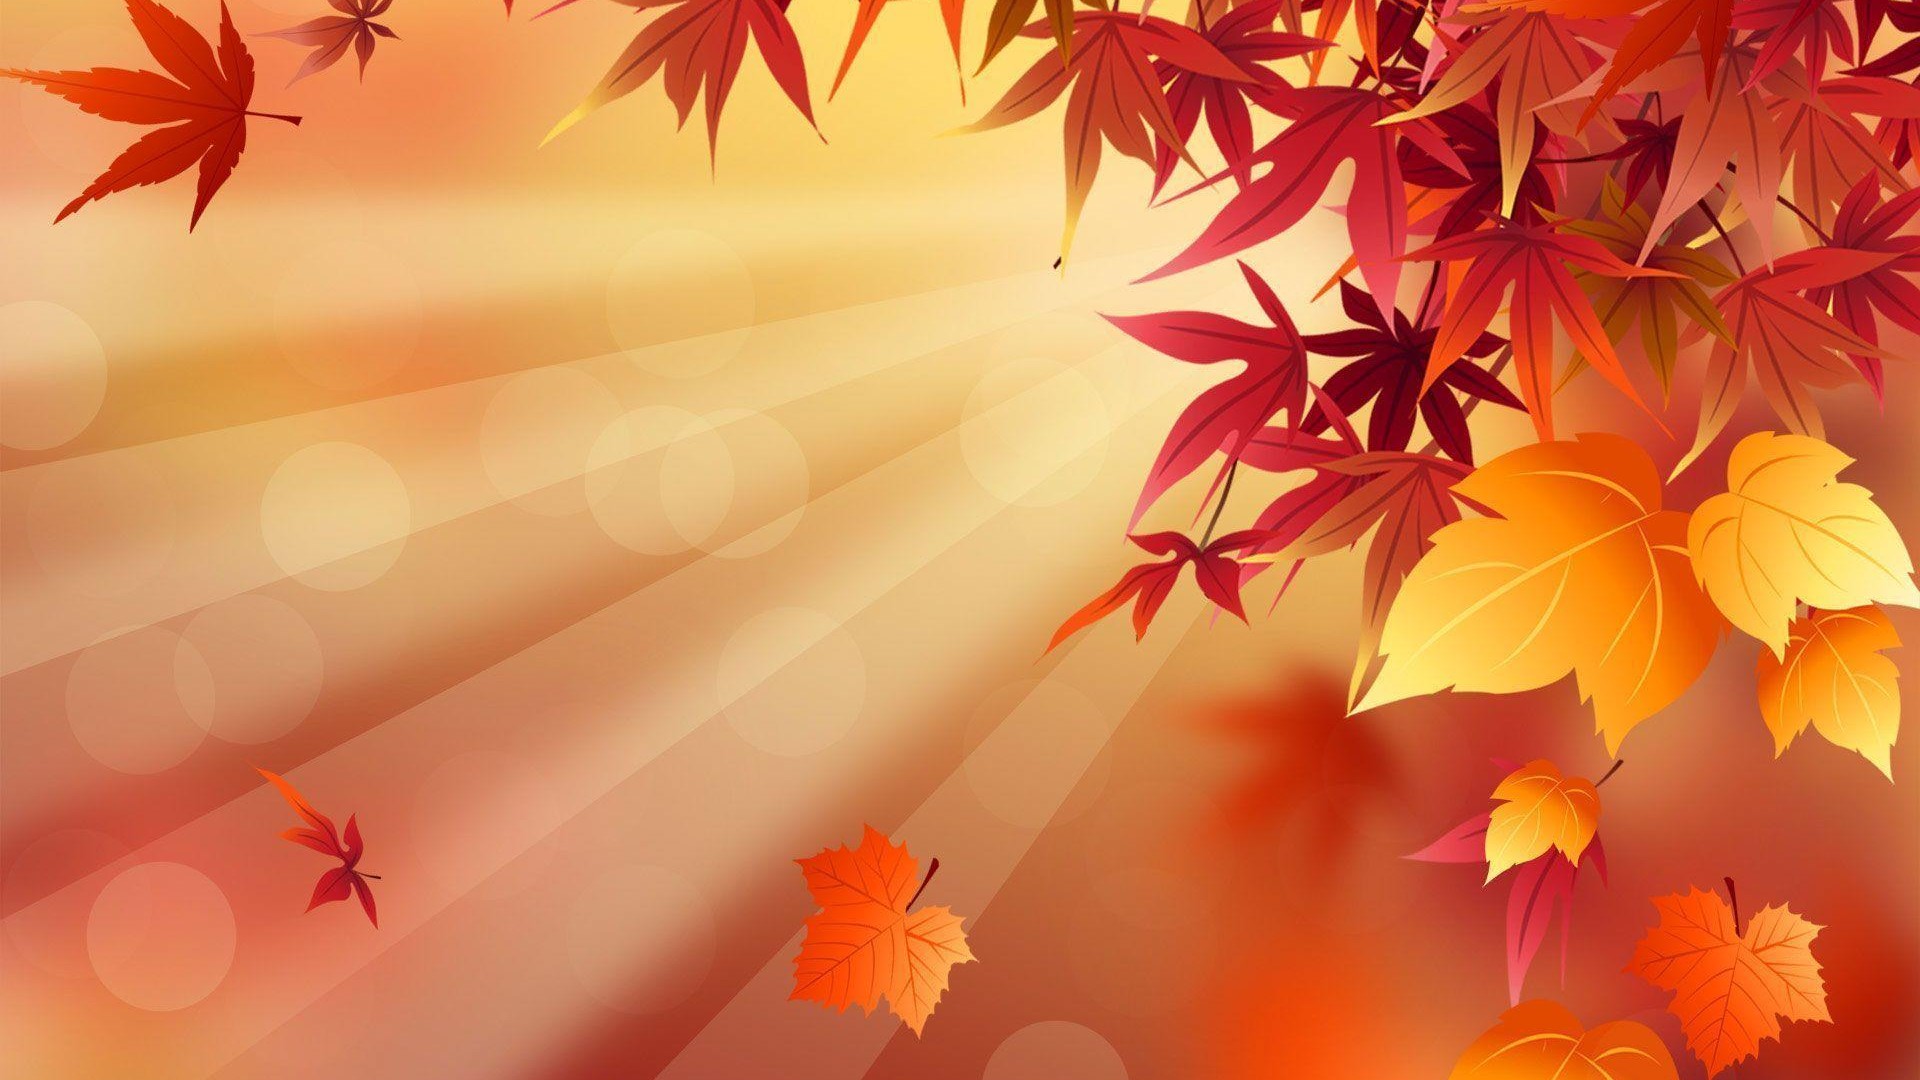 HD Cute Fall Backgrounds With high-resolution 1920X1080 pixel. You can use this wallpaper for your Desktop Computer Backgrounds, Mac Wallpapers, Android Lock screen or iPhone Screensavers and another smartphone device